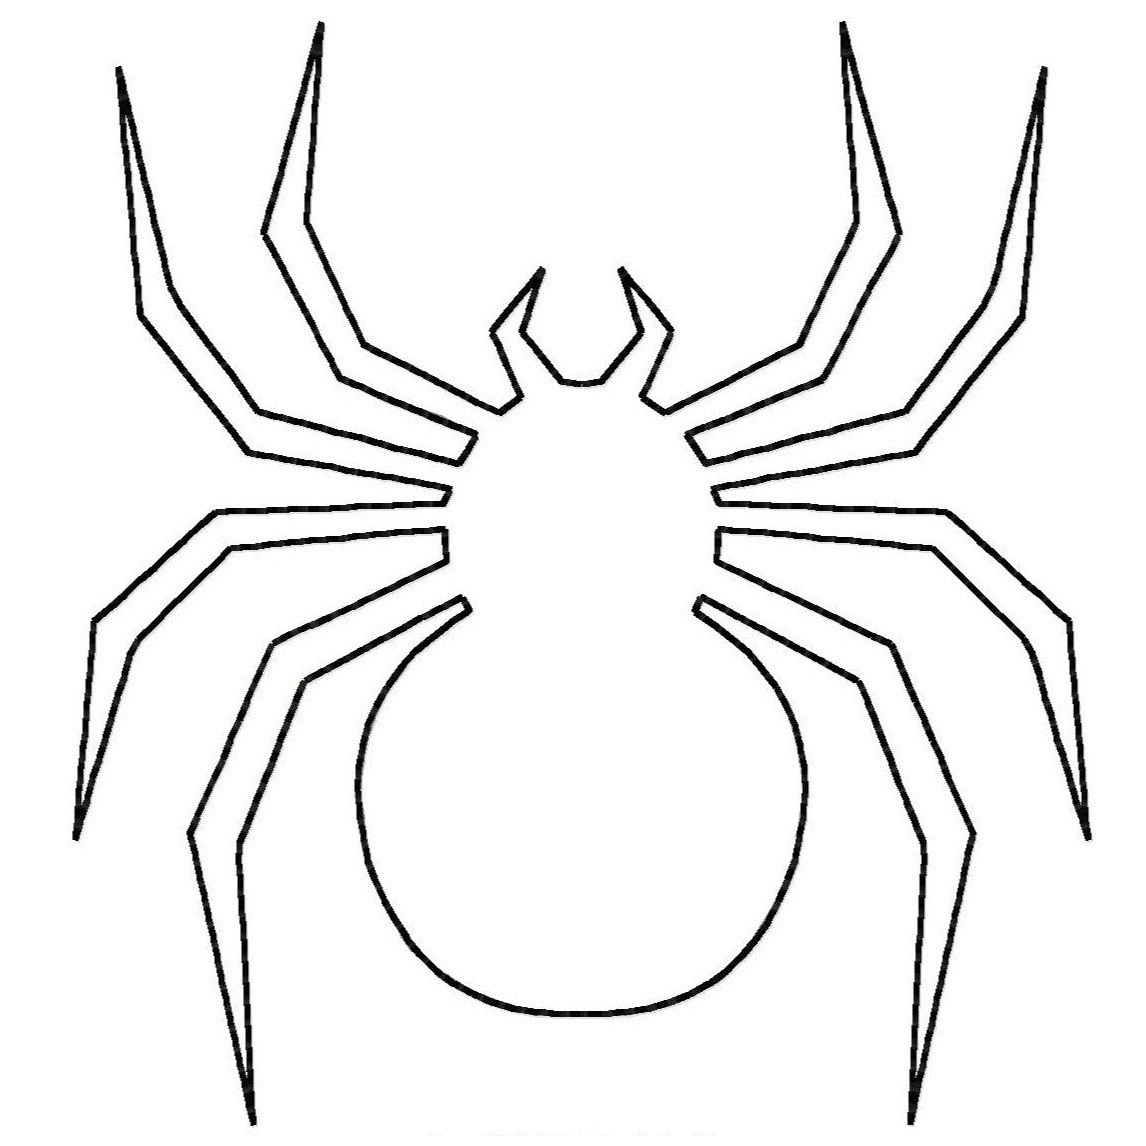 Spider Coloring Pages - Free Printable Coloring Pages